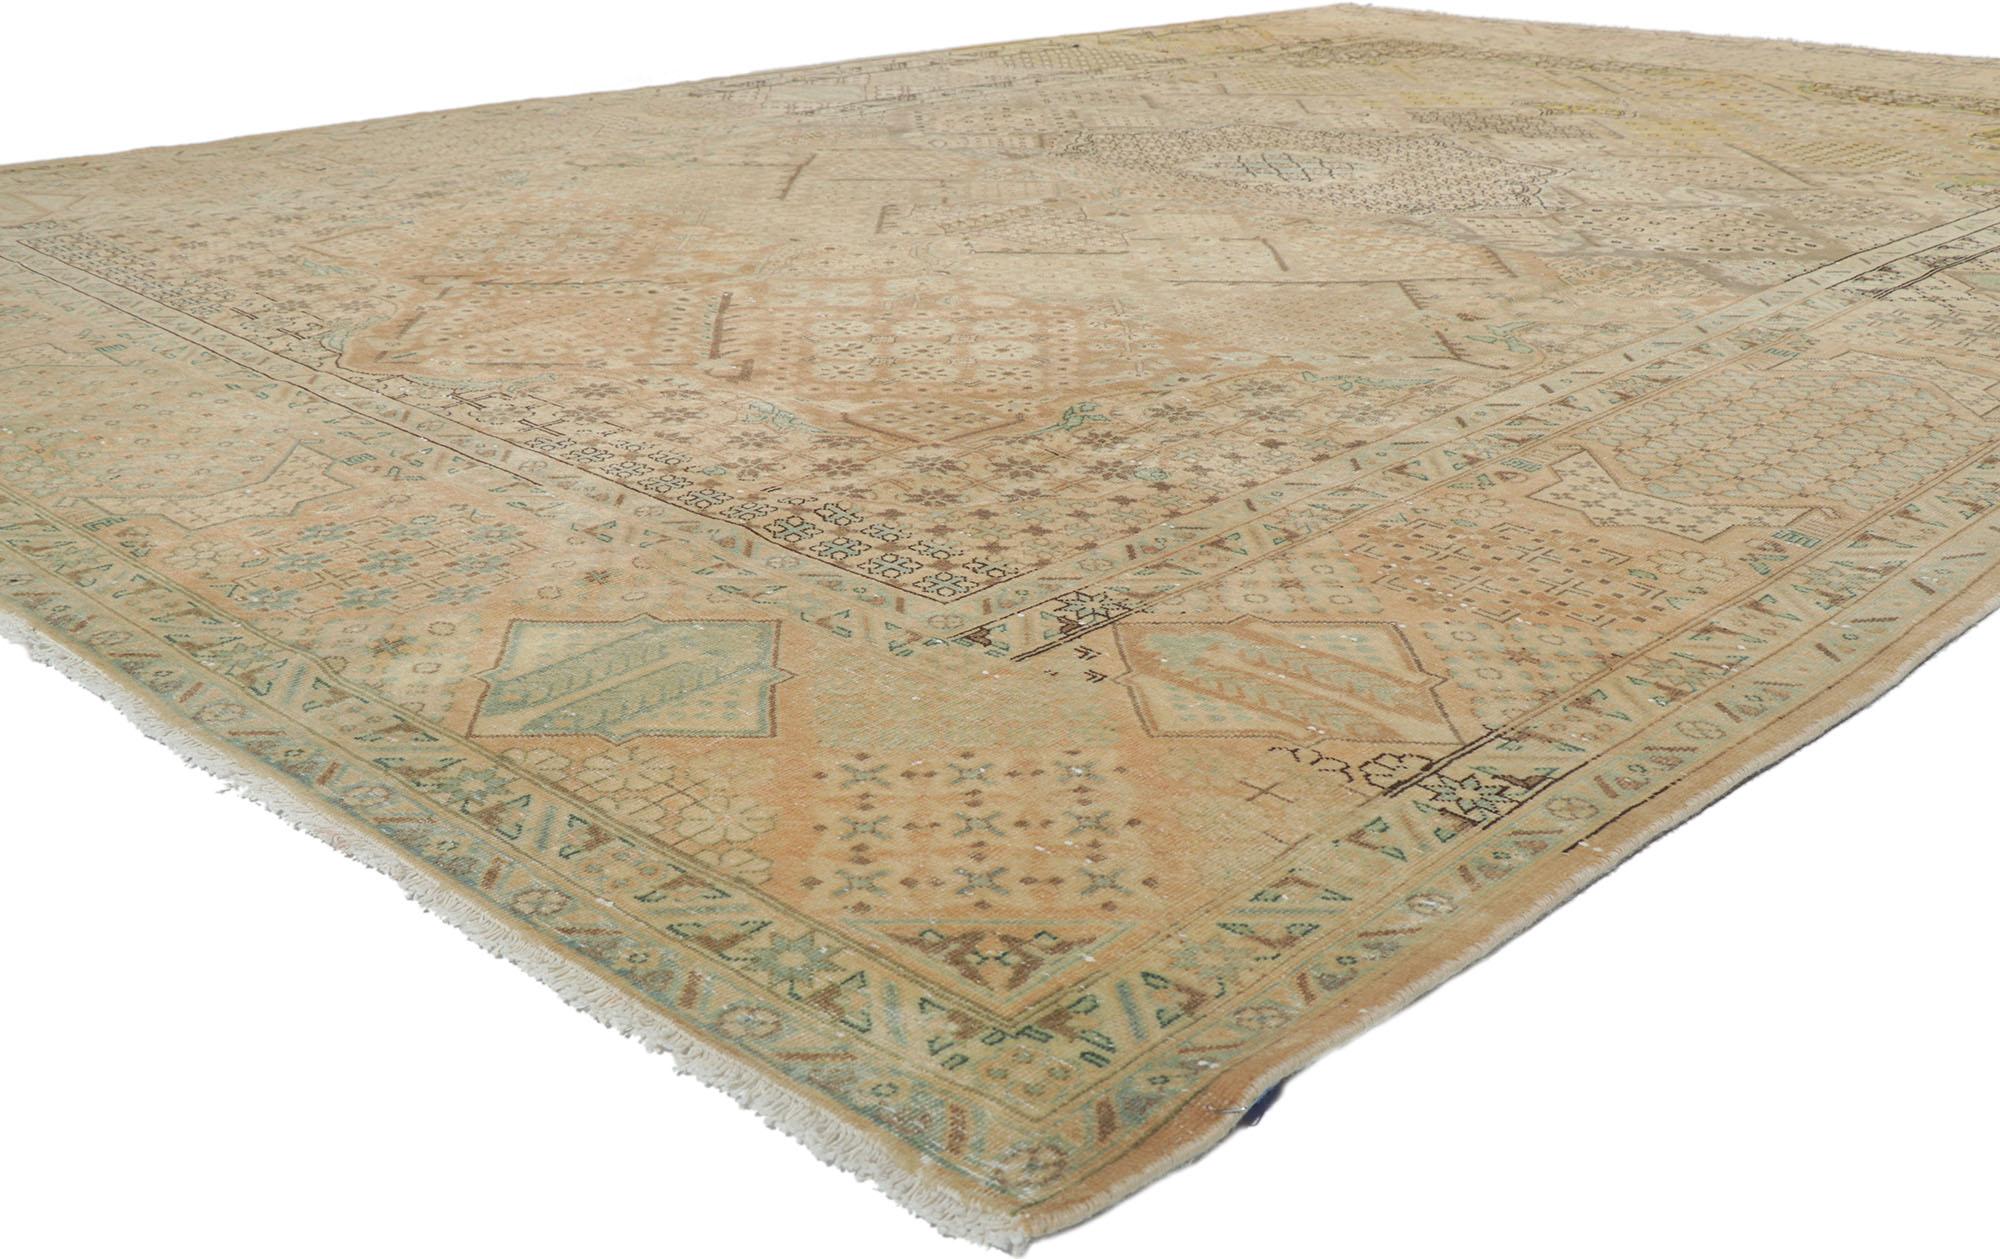 61001 Vintage Persian Joshegan Rug, 09'09 x 14'00. 
Traditional sensibility meets effortlessly chic in this vintage Persian Joshegan rug. The incrustation pattern and soft colors woven into this piece work together creating a beautiful juxtaposition